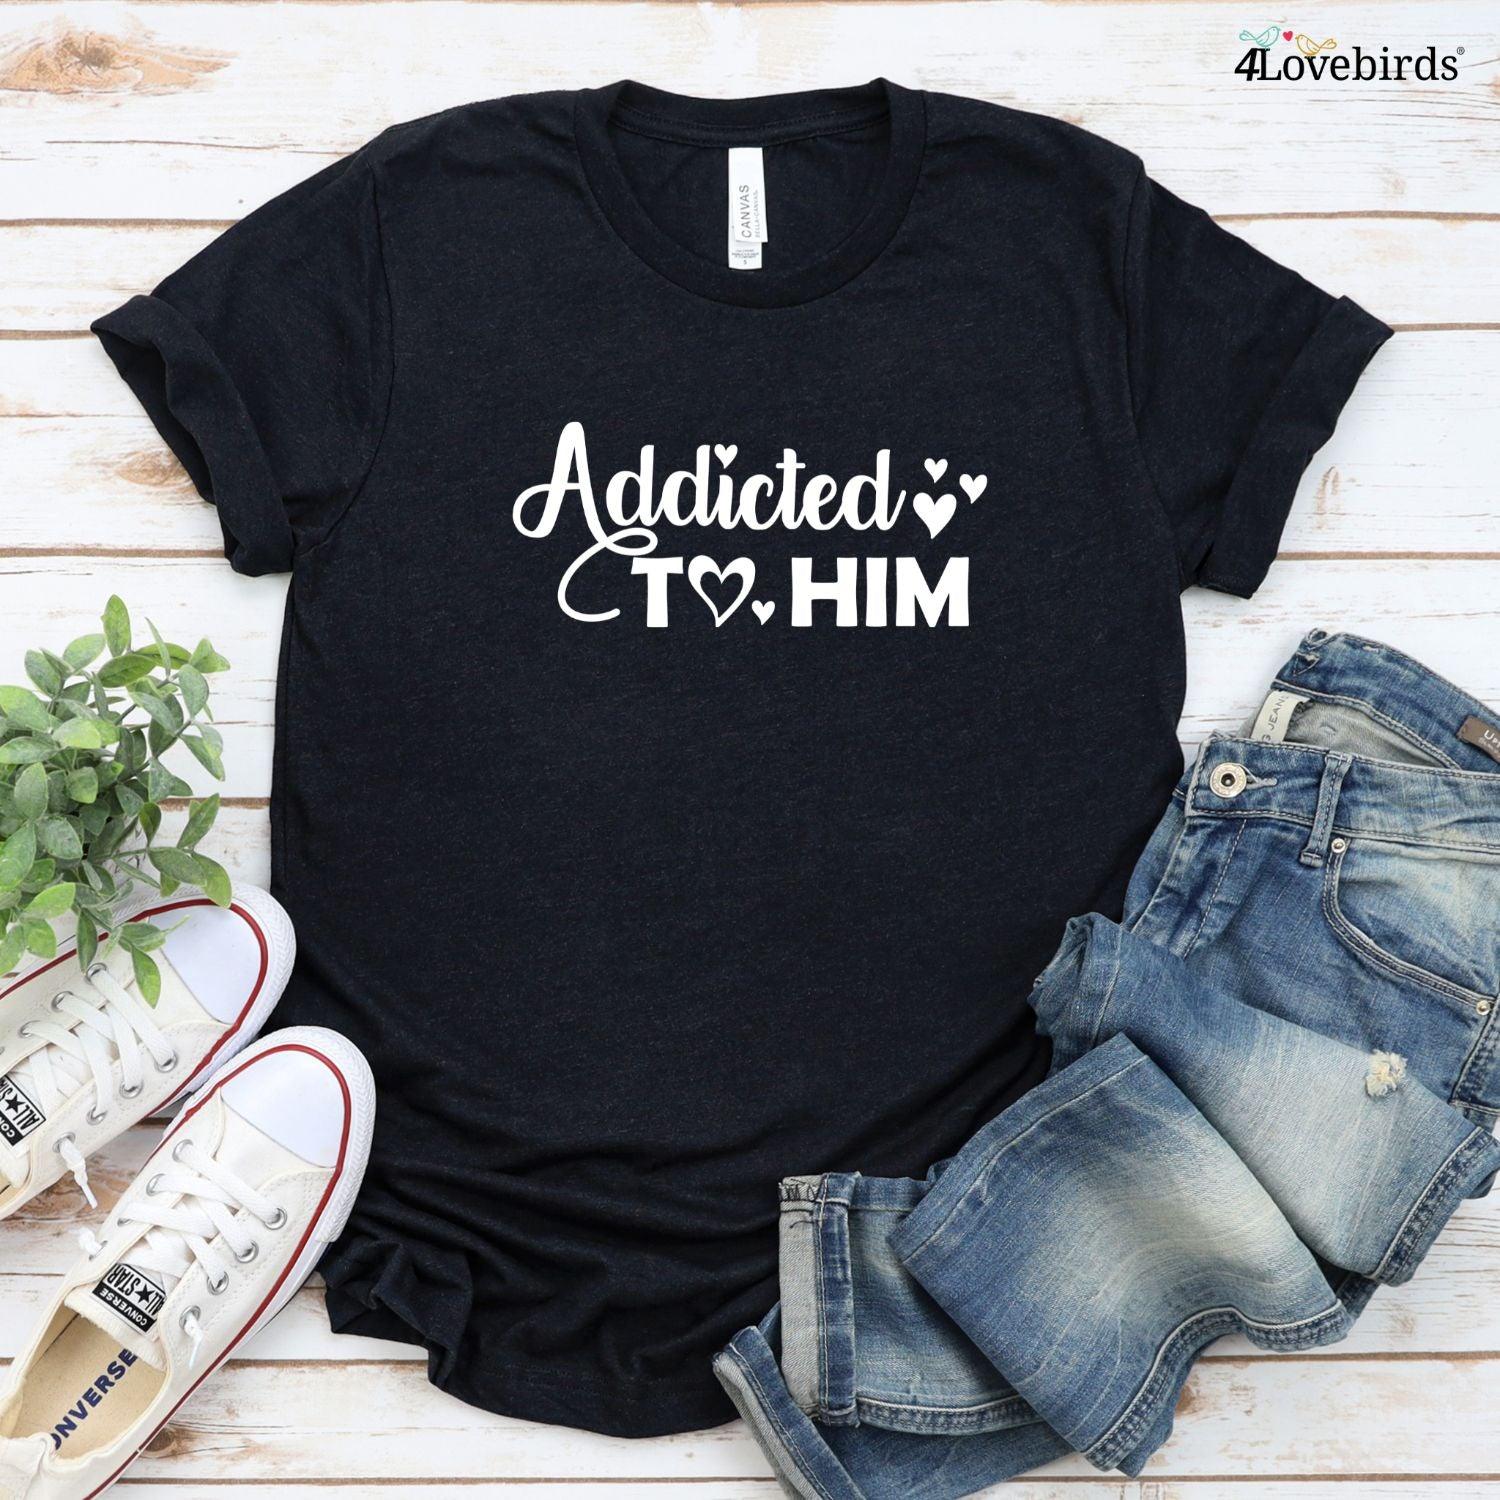 Valentine Gift: Matching Set for Couples - Addict Him & Her Tops & Sweatshirts - 4Lovebirds